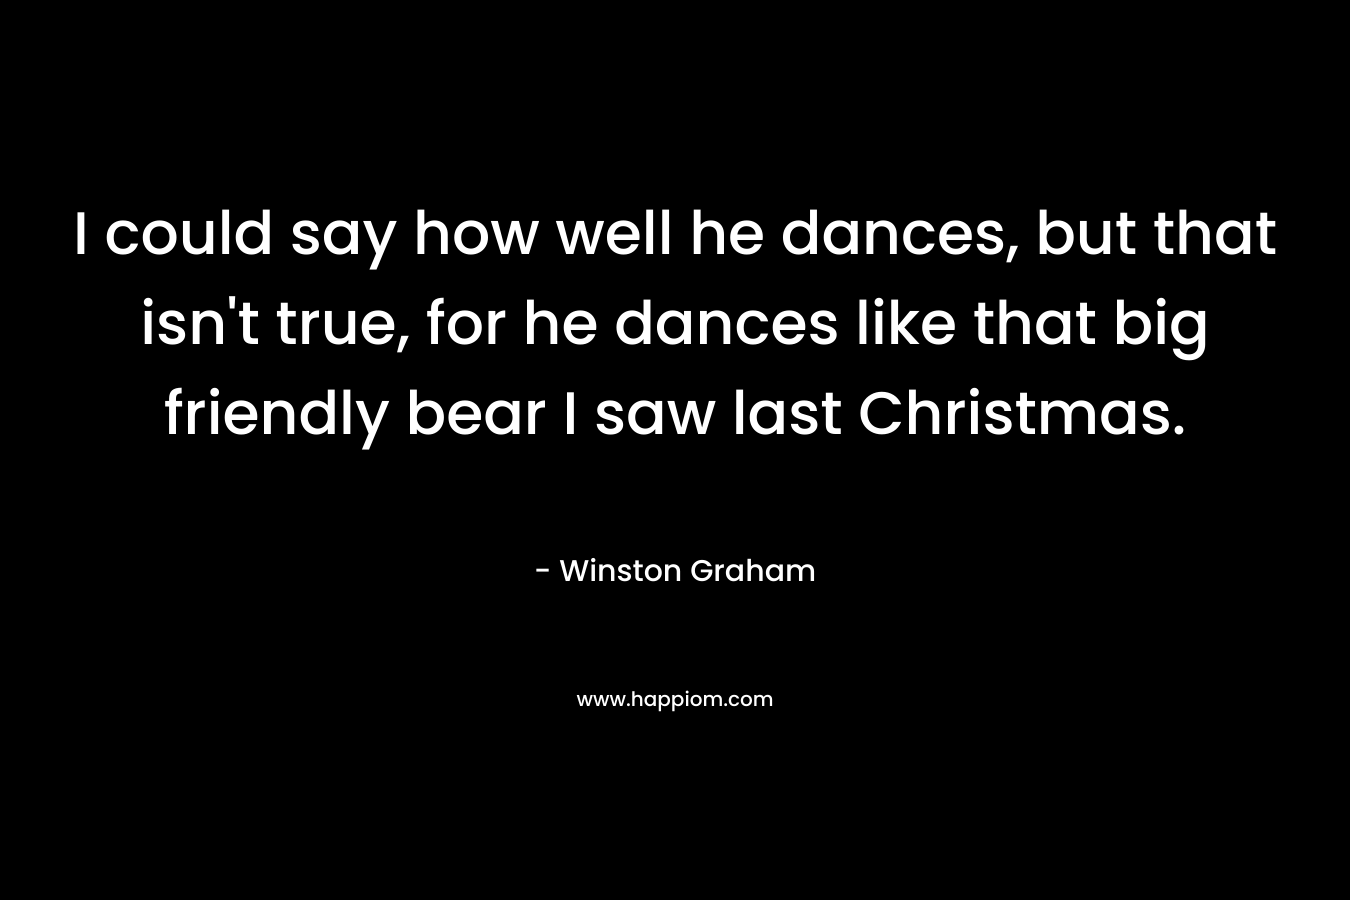 I could say how well he dances, but that isn’t true, for he dances like that big friendly bear I saw last Christmas. – Winston Graham